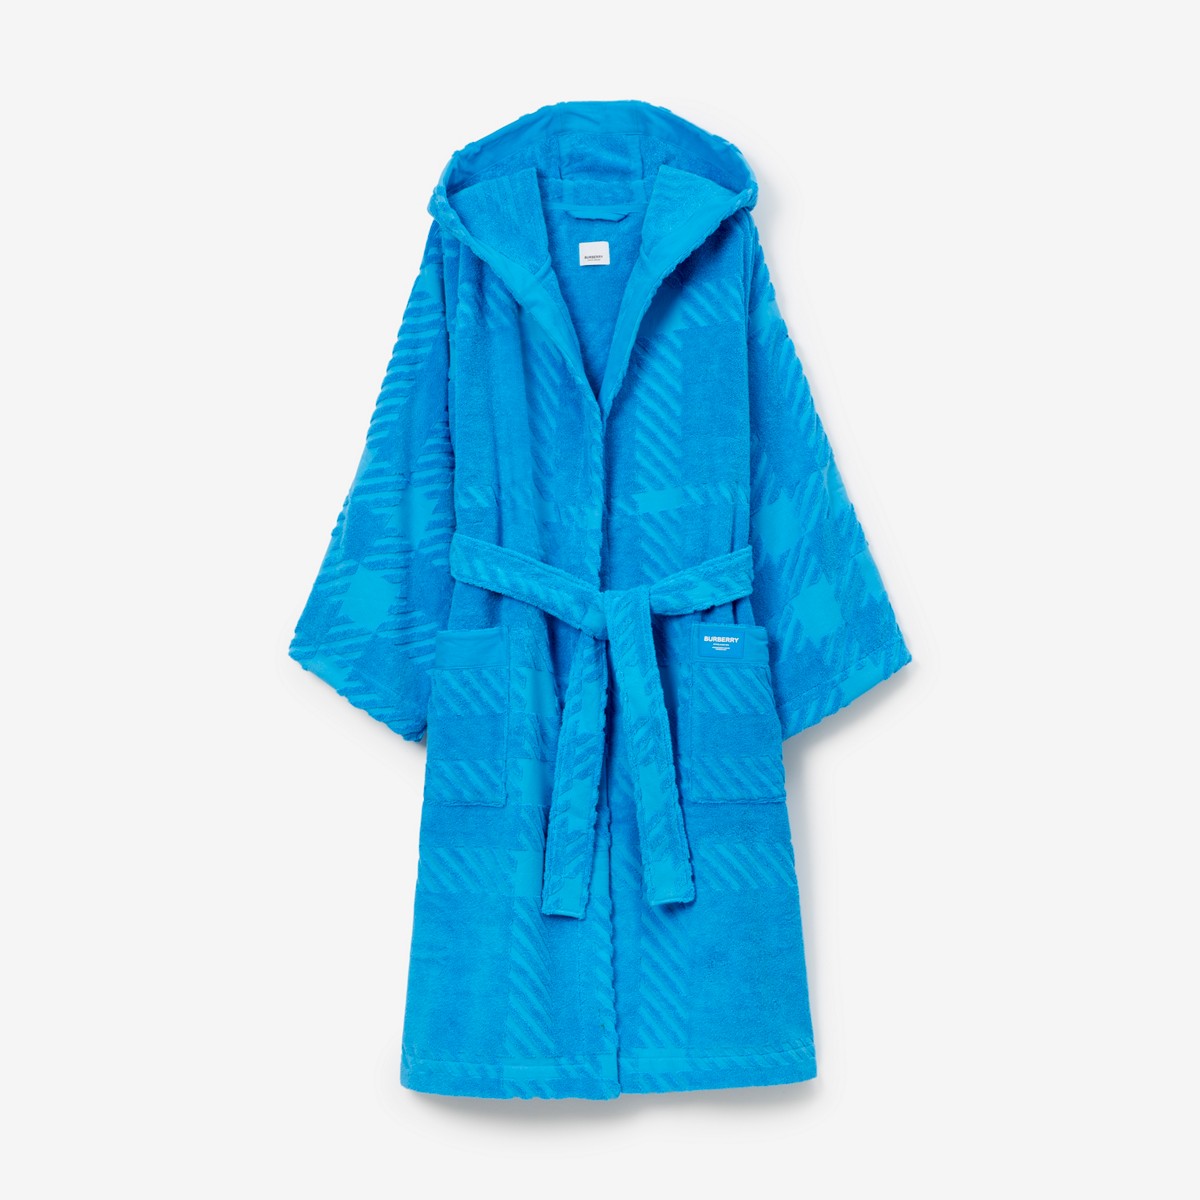 Burberry Check Cotton Jacquard Hooded Robe In Vivid Blue